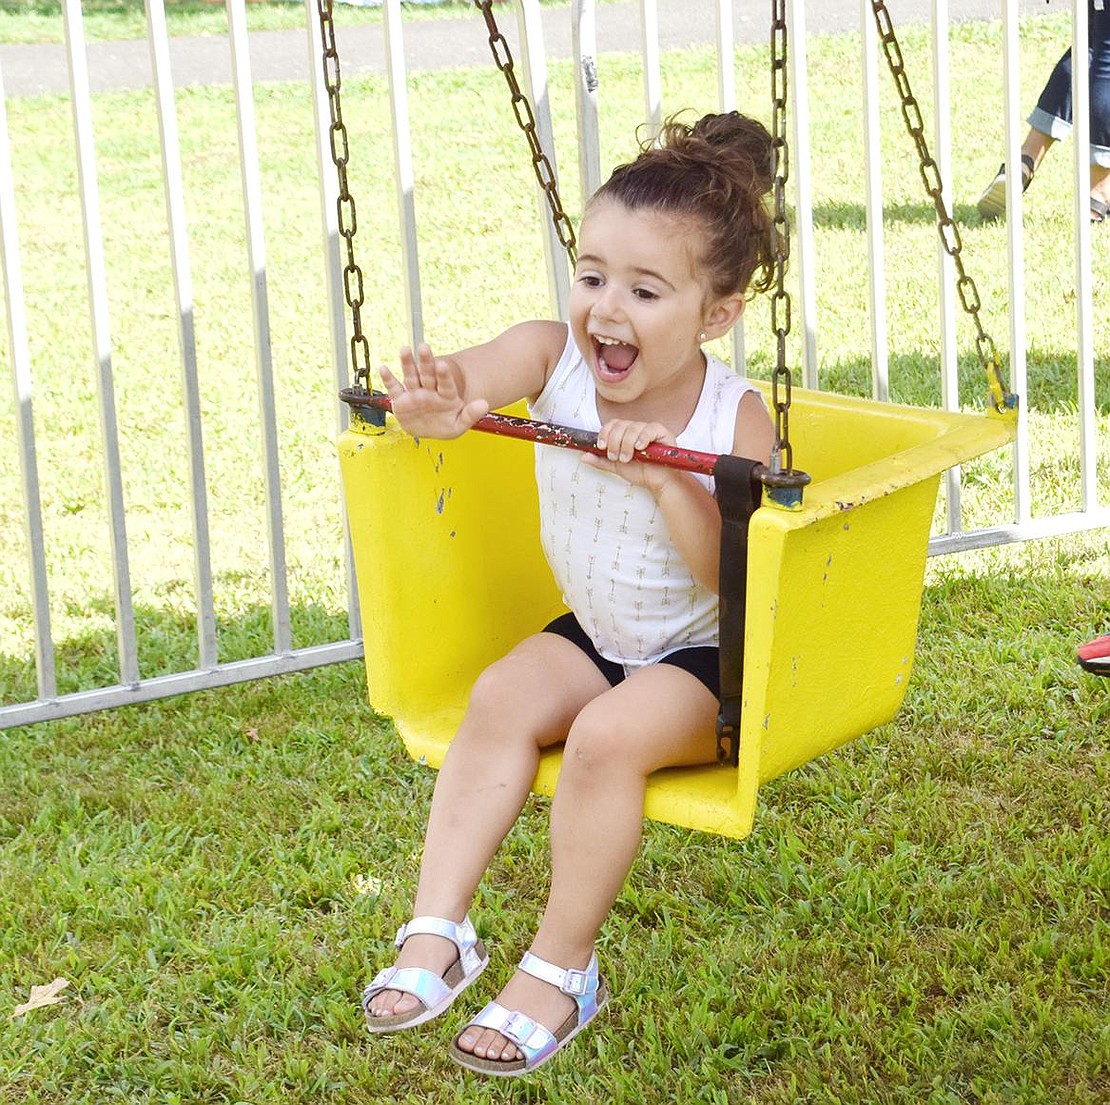 With a massive smile, Alessia Facciola waves at her family on the other side of the gate as she comes around on the swing ride. The Bedford 3-year-old is visiting her King Street-residing grandparents to enjoy Port Chester Day at Lyon Park on Saturday, Aug. 24.